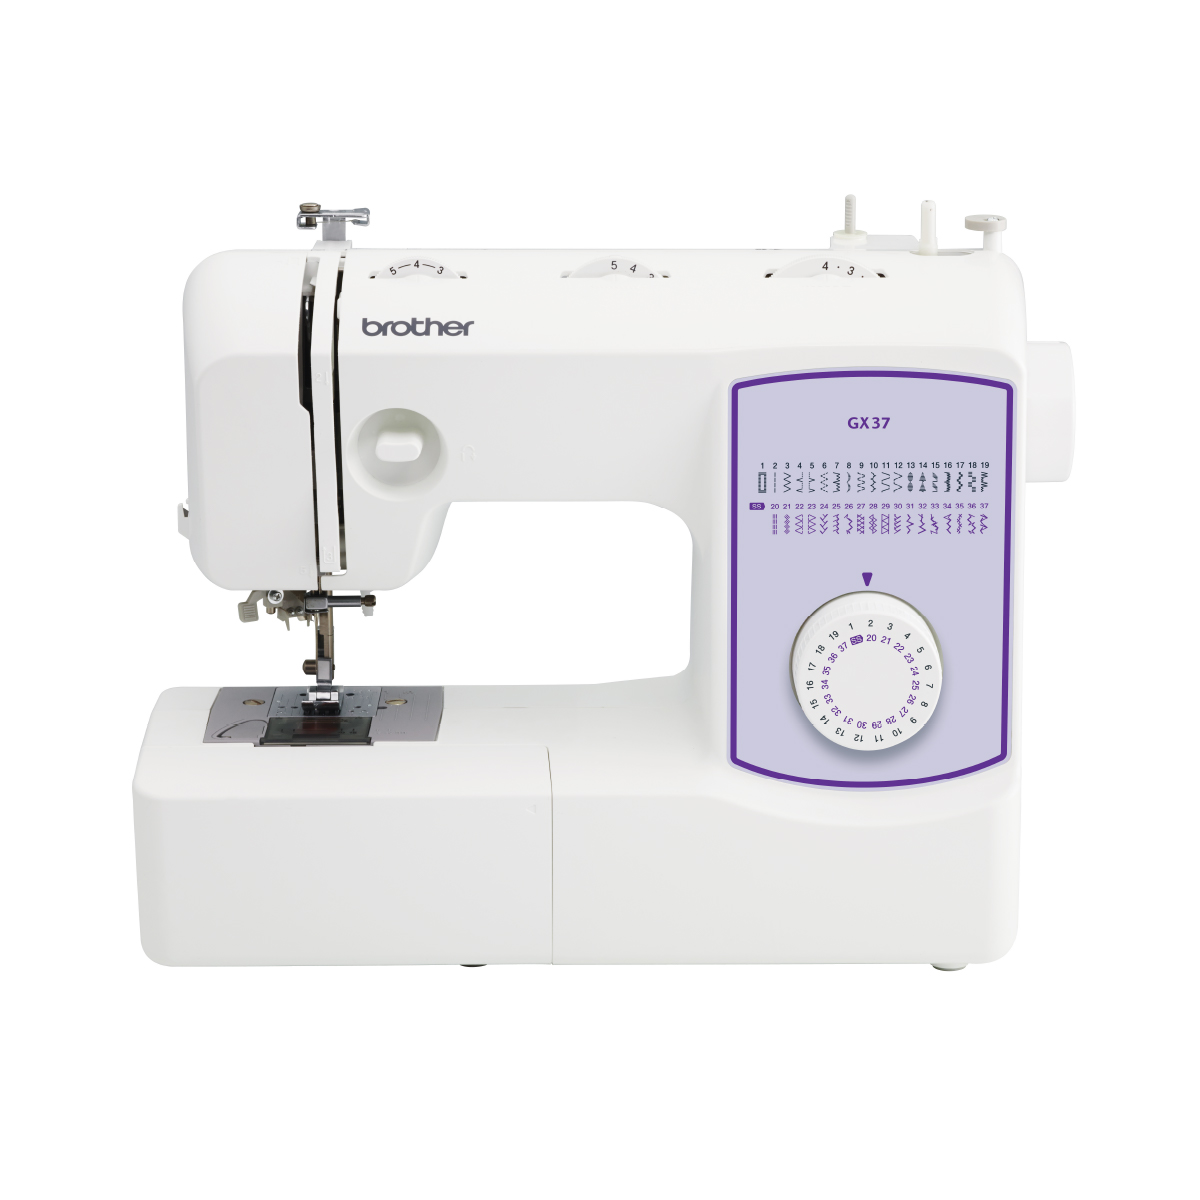 Brother GX37 Lightweight Portable Mechanical Sewing Machine with 37 Built-In Stitches - image 1 of 11